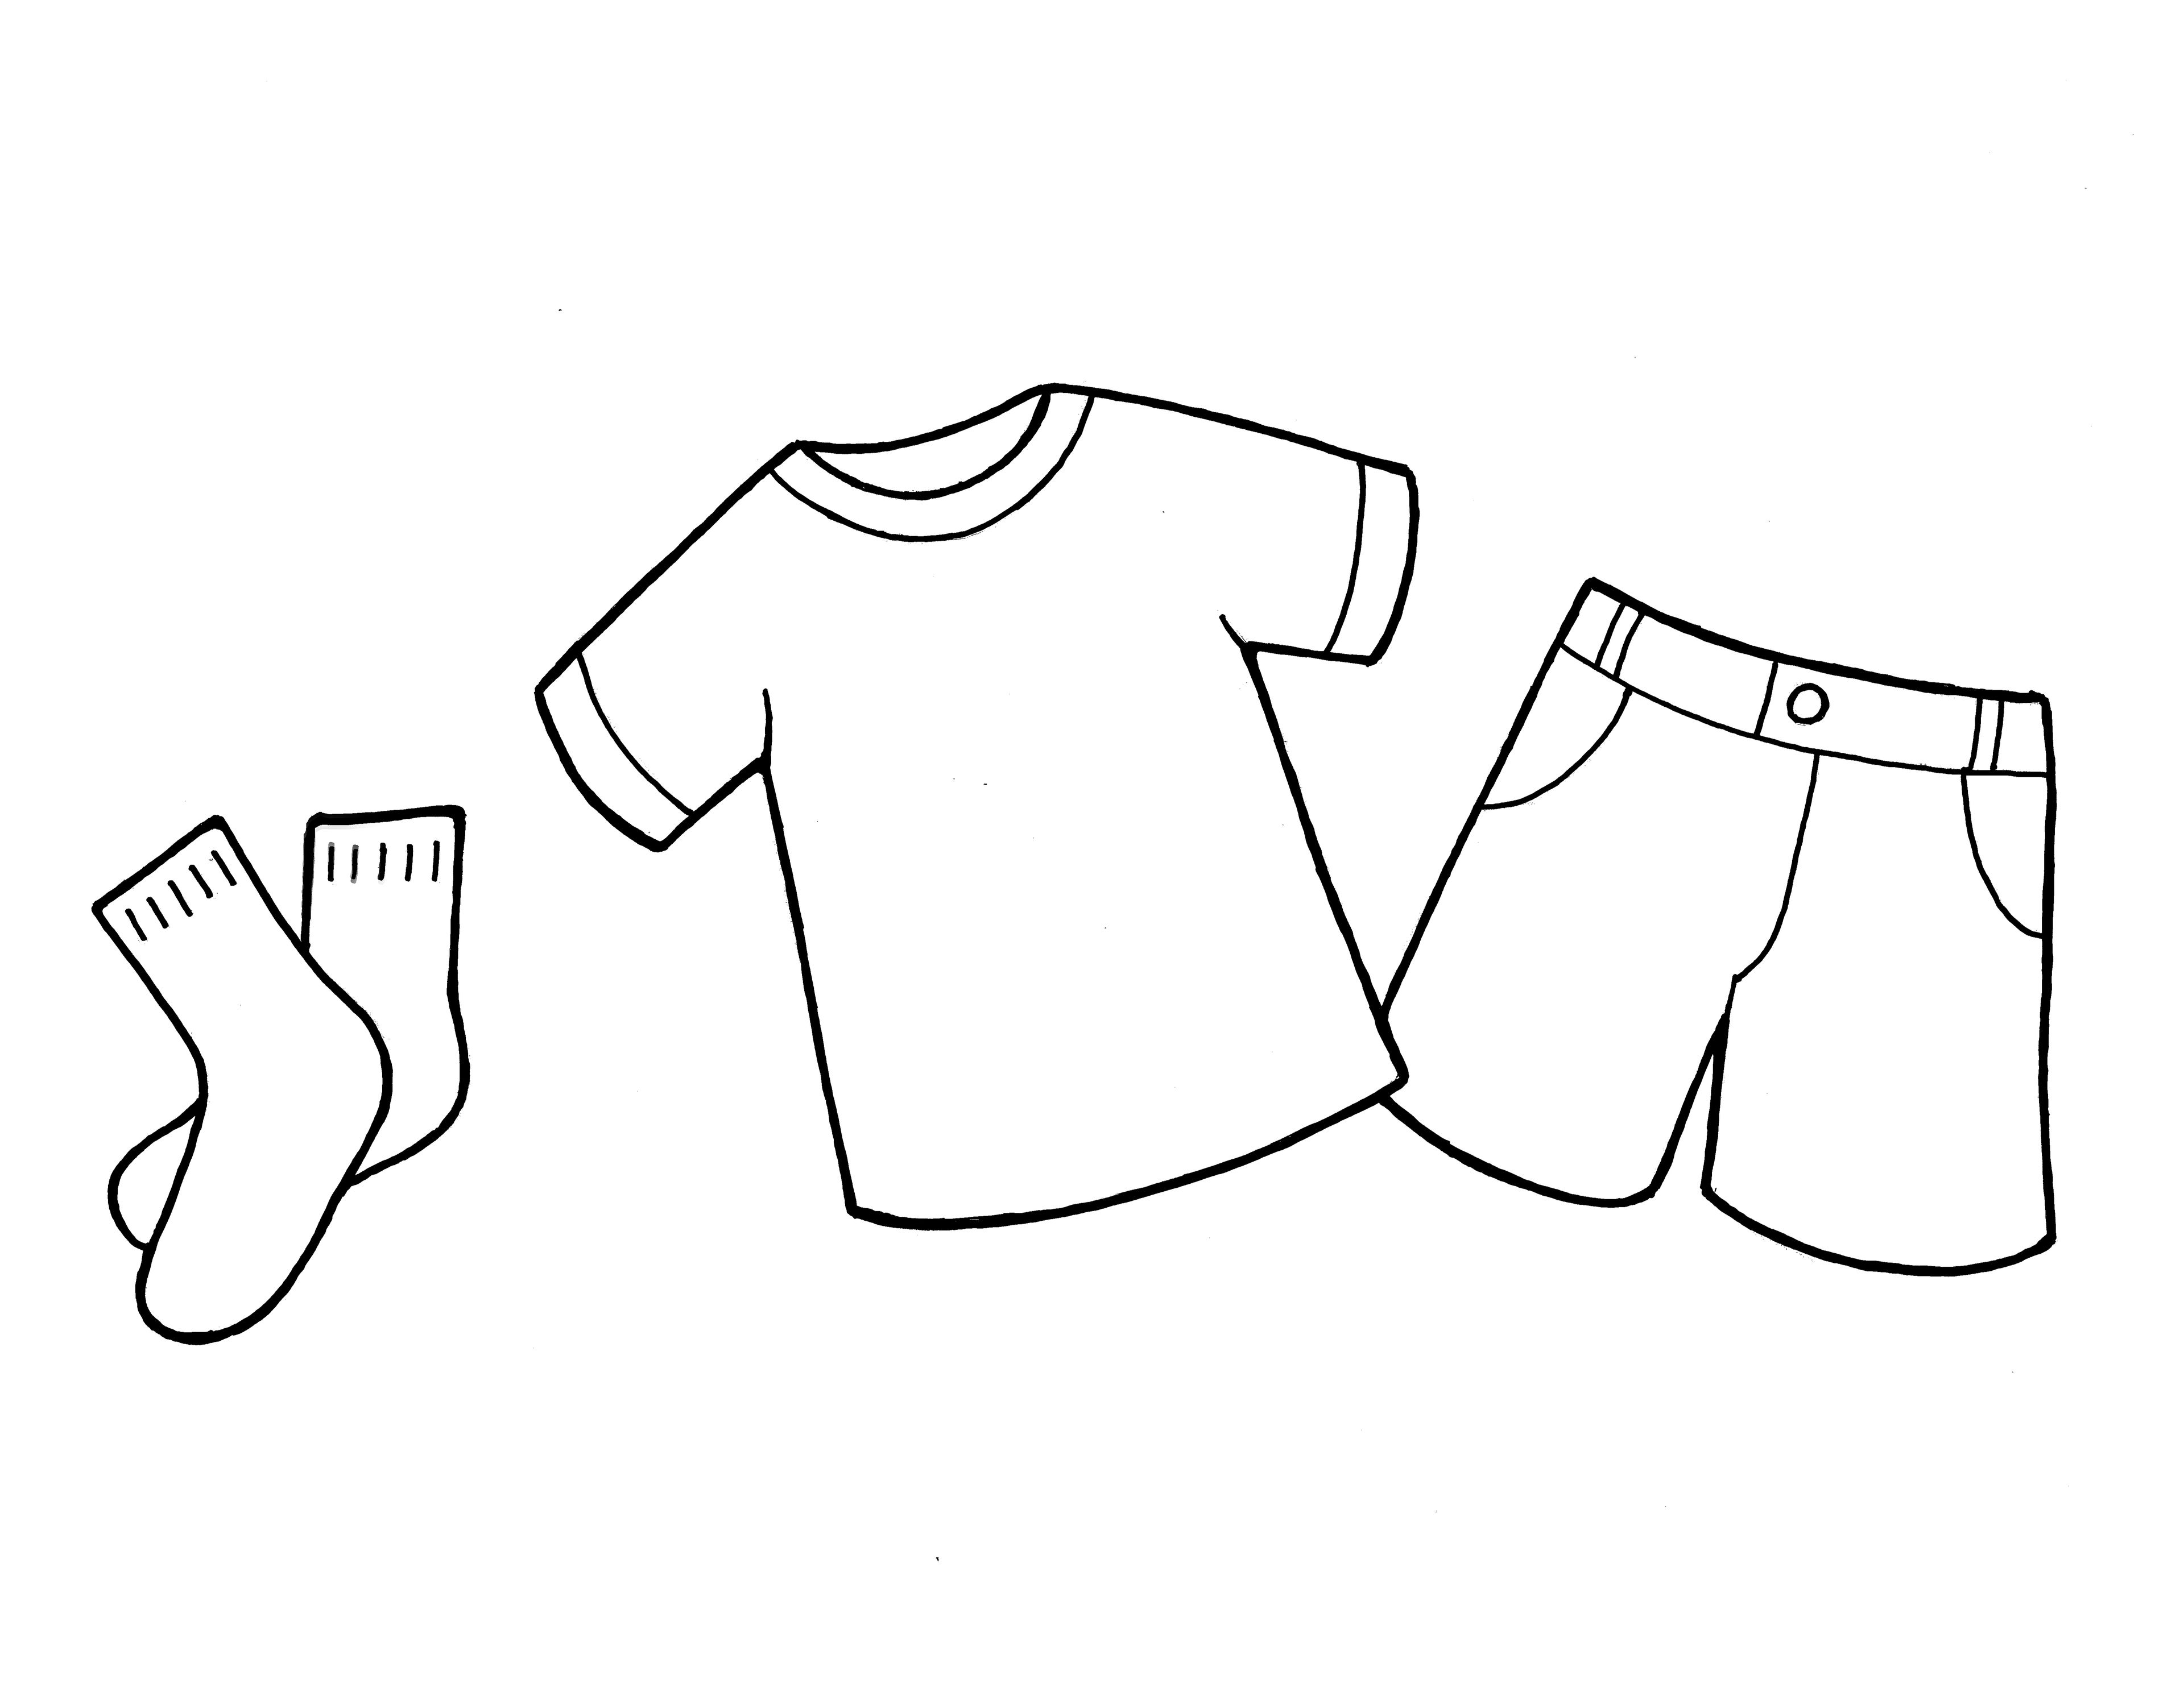 An illustration of clothing from the nursery manual Behold Your Little Ones (2008), pages 55 and 67.